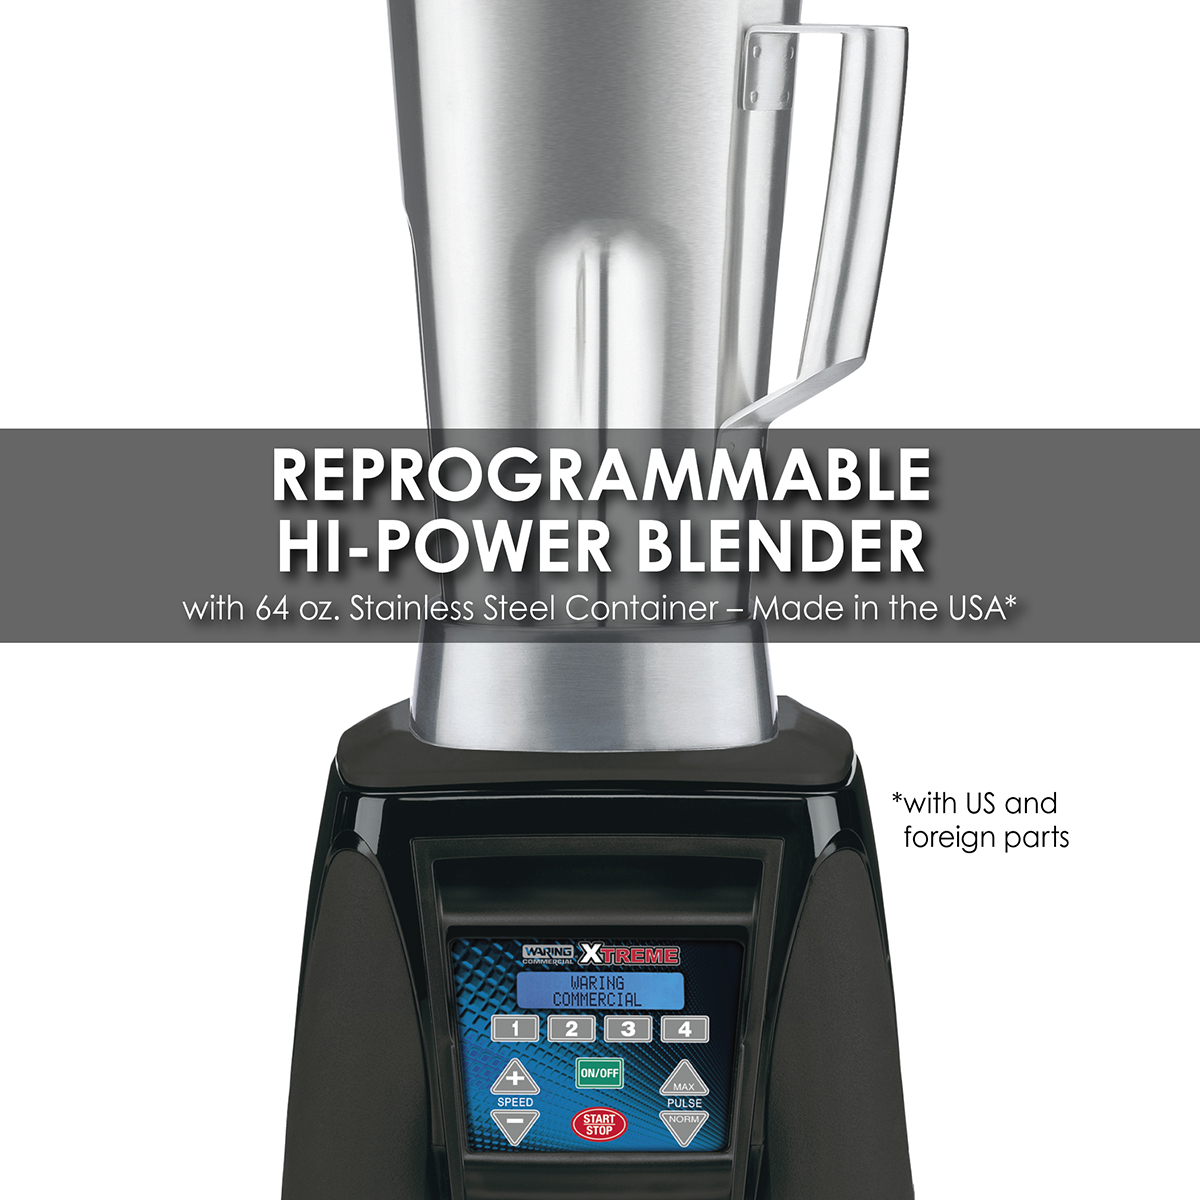 Waring Commercial Reprogrammable Hi-Power Blender with Sound